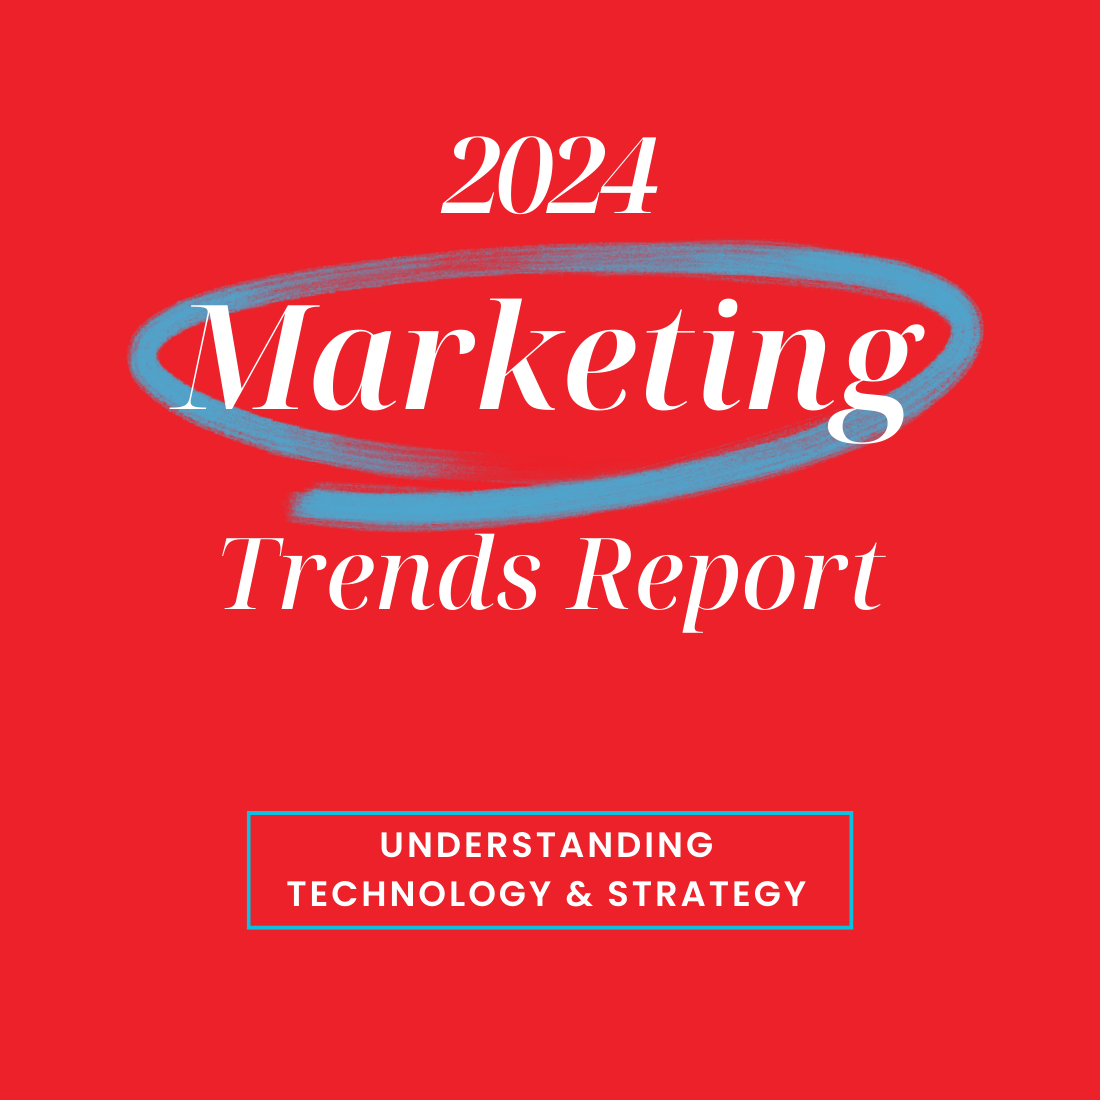 Using the 2024 marketing trends to advance your business